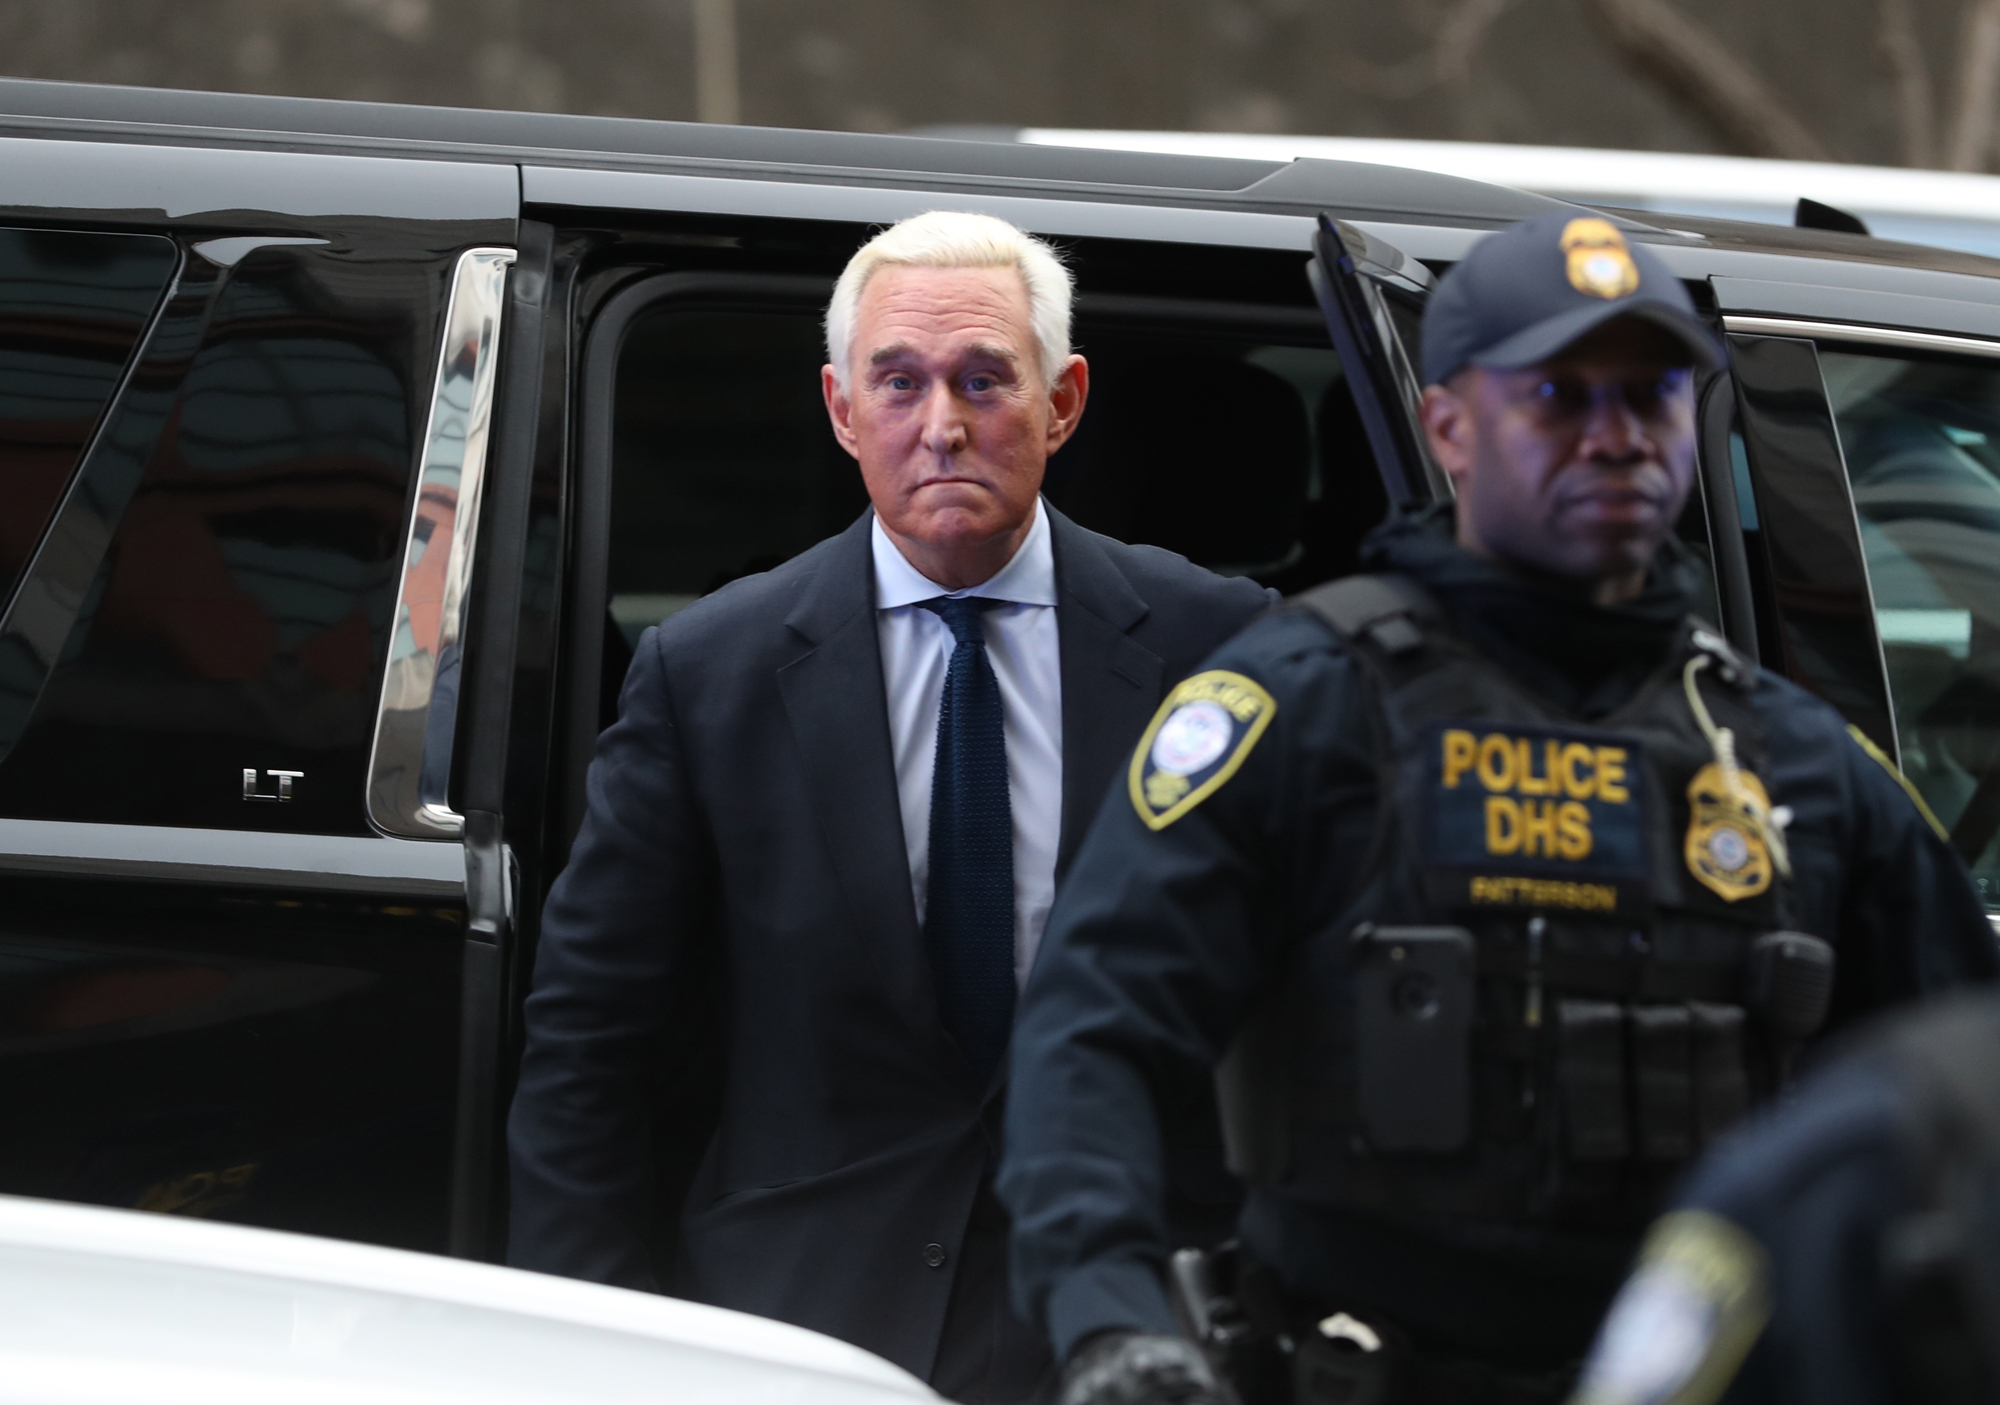 PHOTO: Former campaign adviser for President Donald Trump, Roger Stone arrives at Federal Court, Jan. 29, 2019, in Washington, D.C.